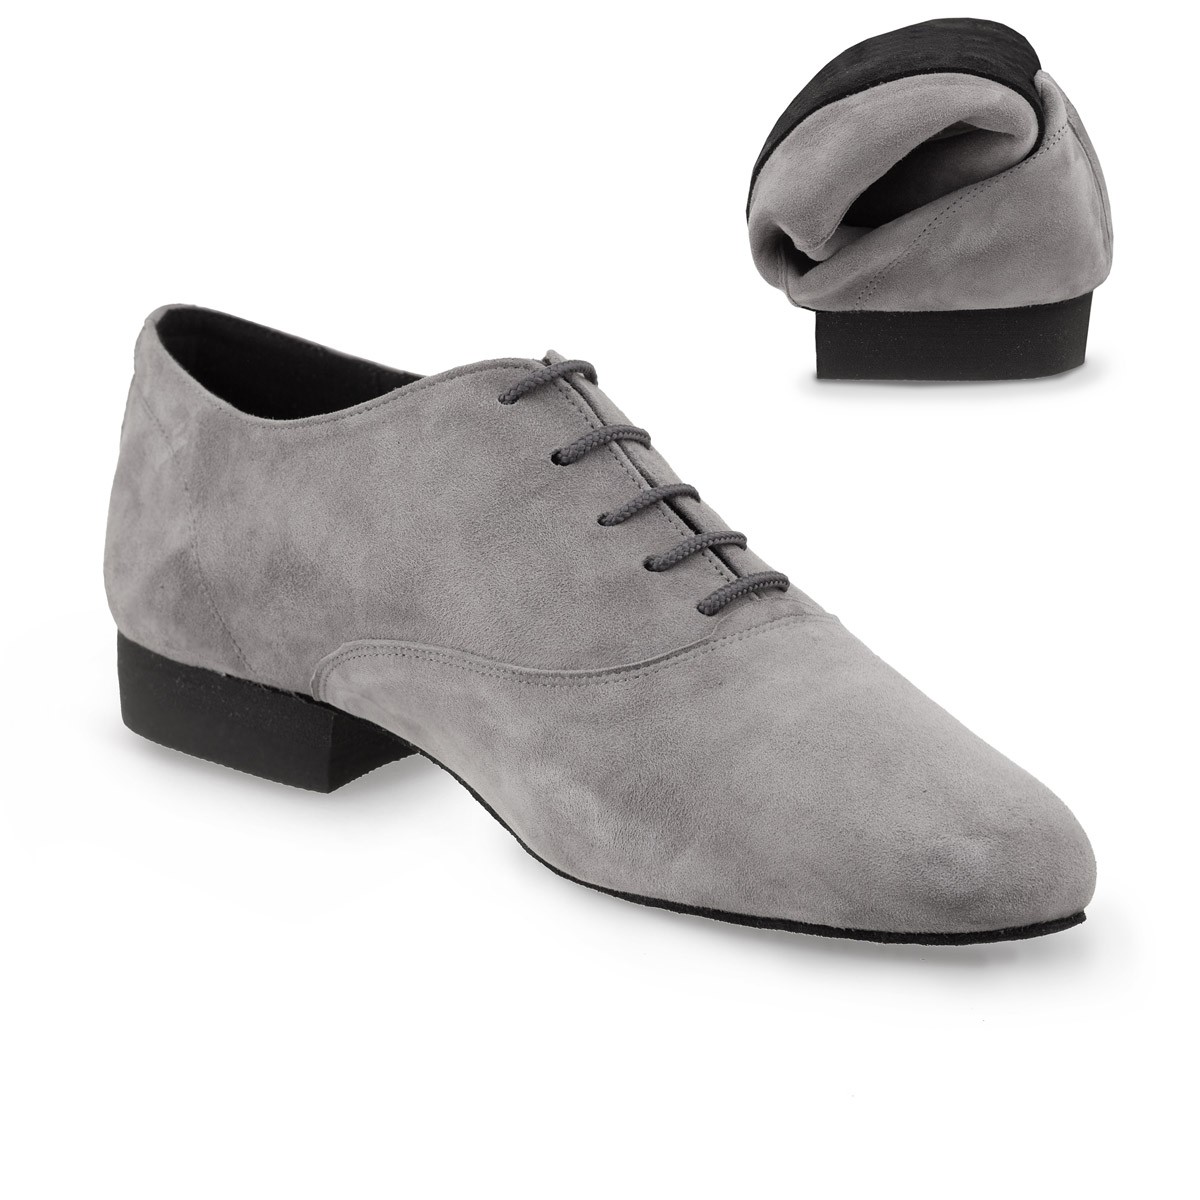 Lace up leather latin dance shoes for men QUALITY FLEXIBLE COMFORTABLE MALE  SALSA SHOES